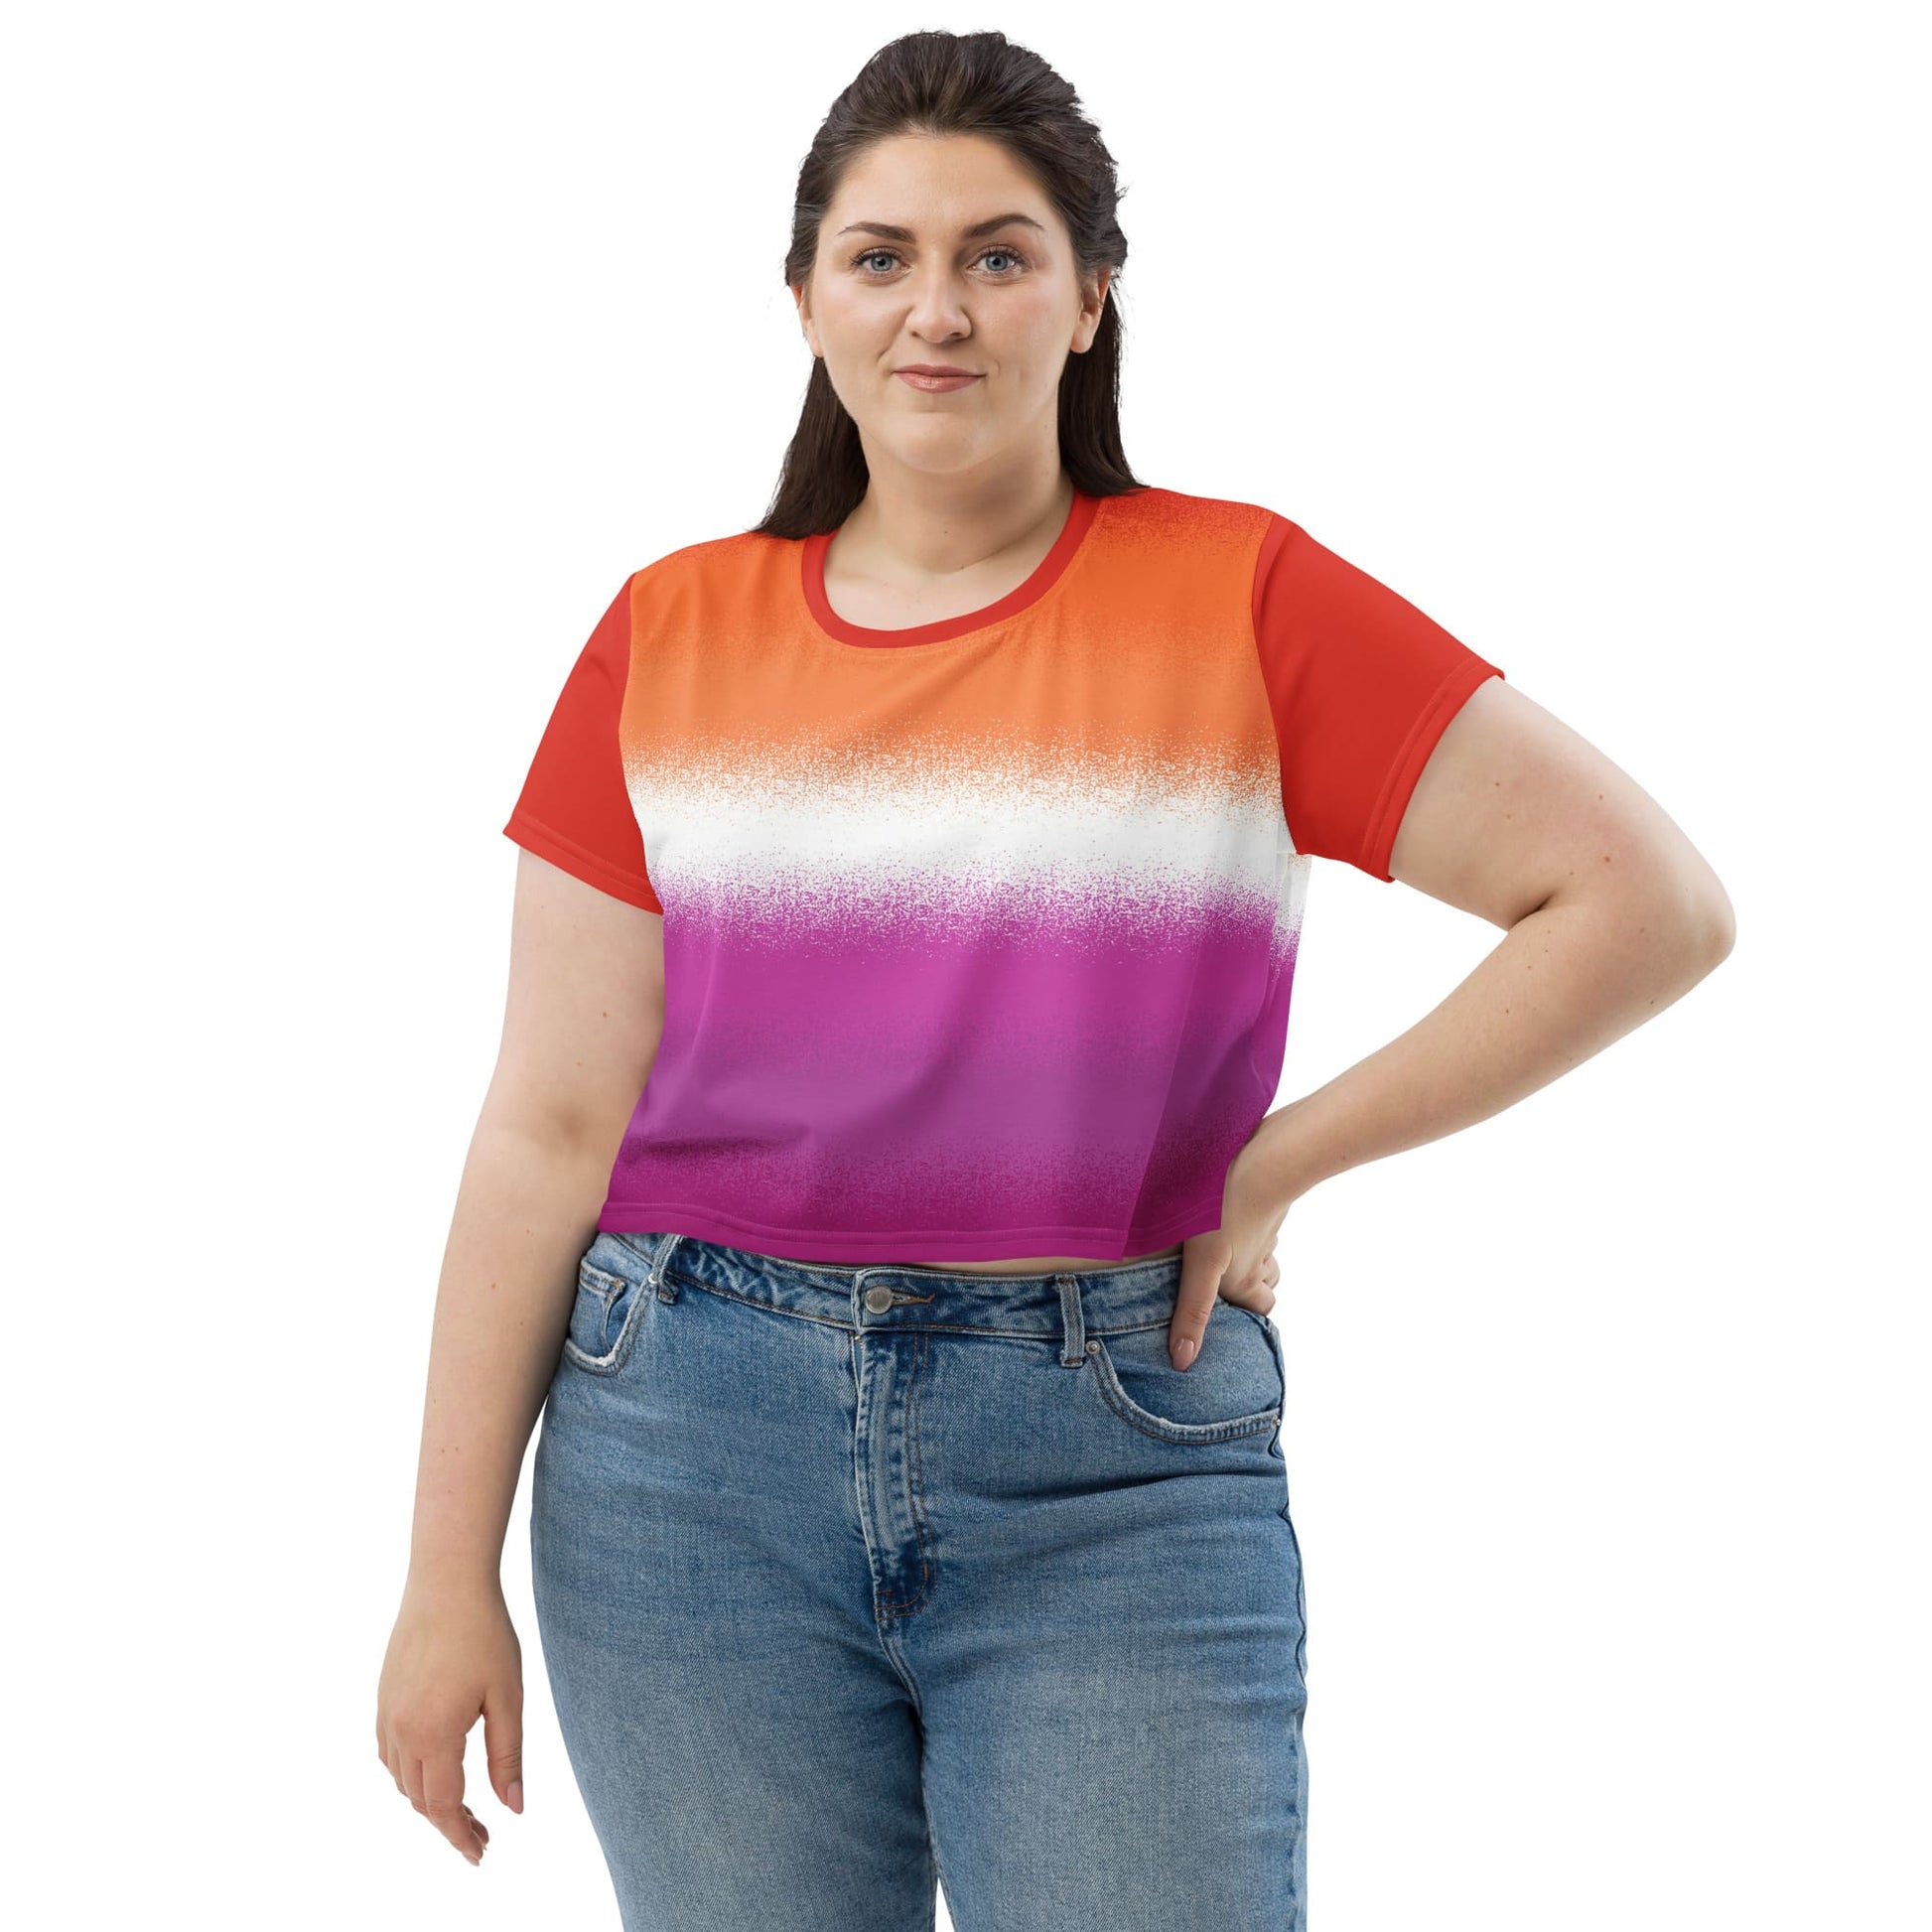 lesbian crop top, sunset flag cropped shirt with wings on back, front model 1